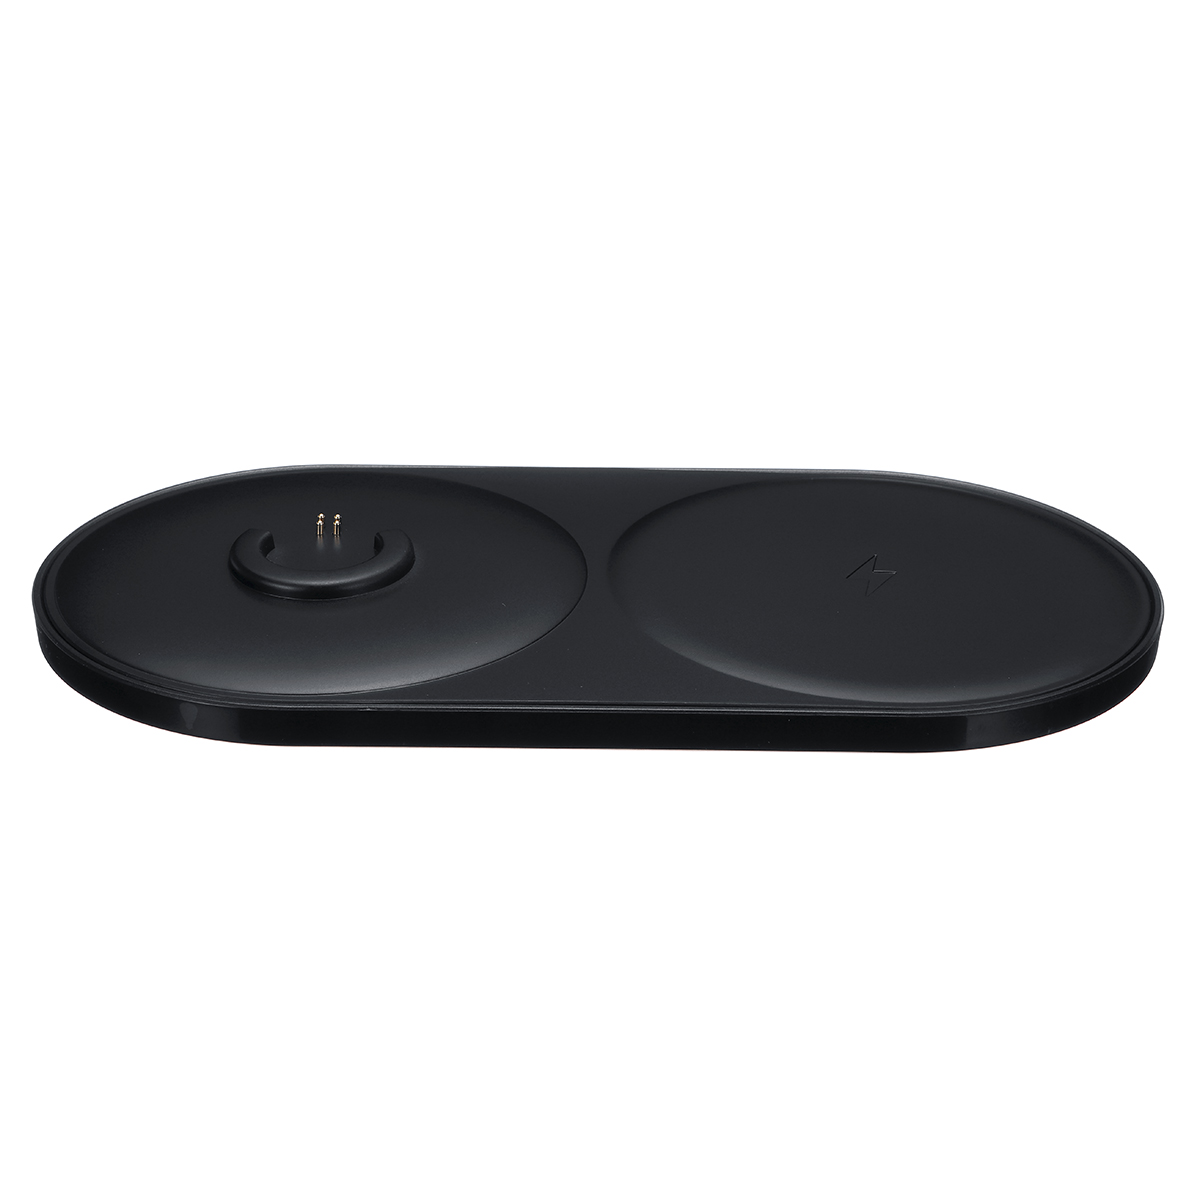 2 in 1 Wireless Charging Charger Pad Speaker Base Charger For SoundLink Revolve For Mobile Phone